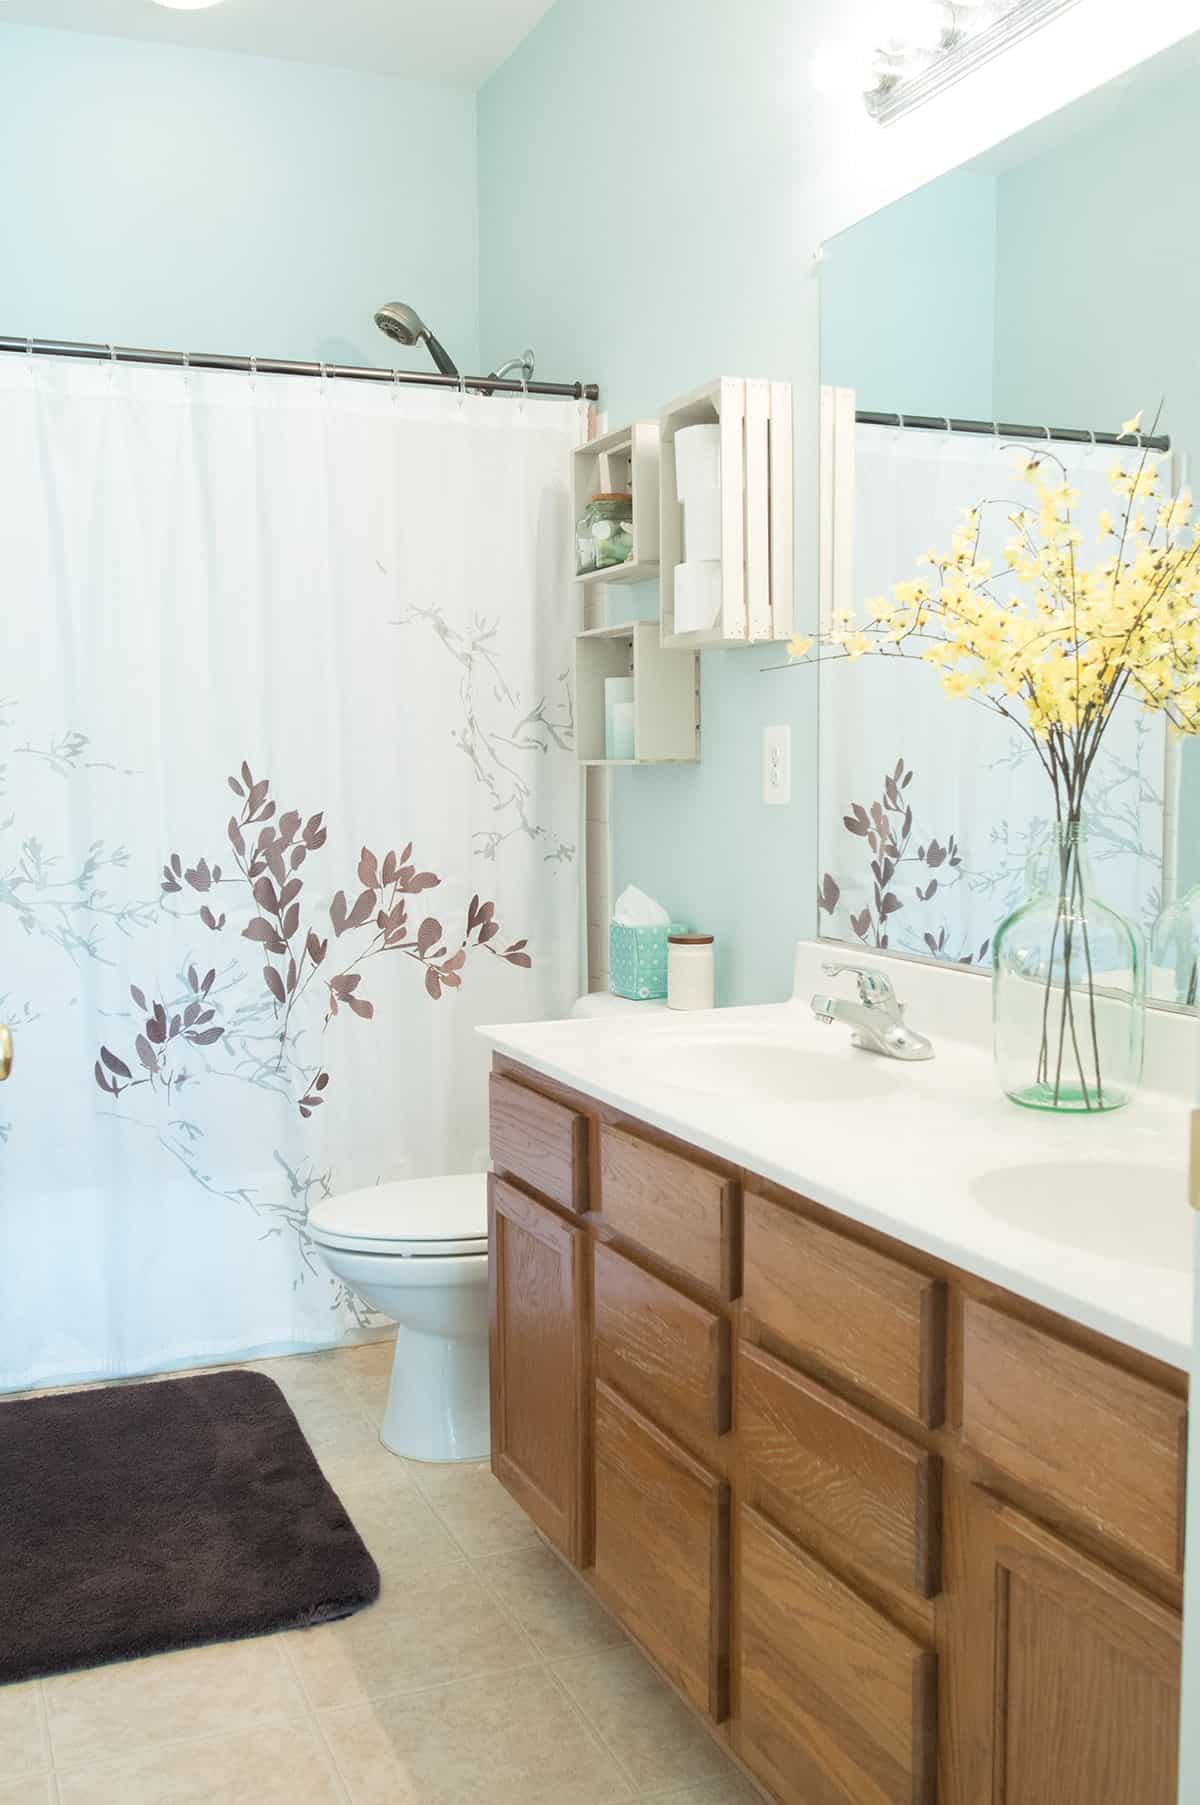 Spa inspired bathroom with floral accents, soft bluish-green wall color, and added wooden crate shelves above commode. 